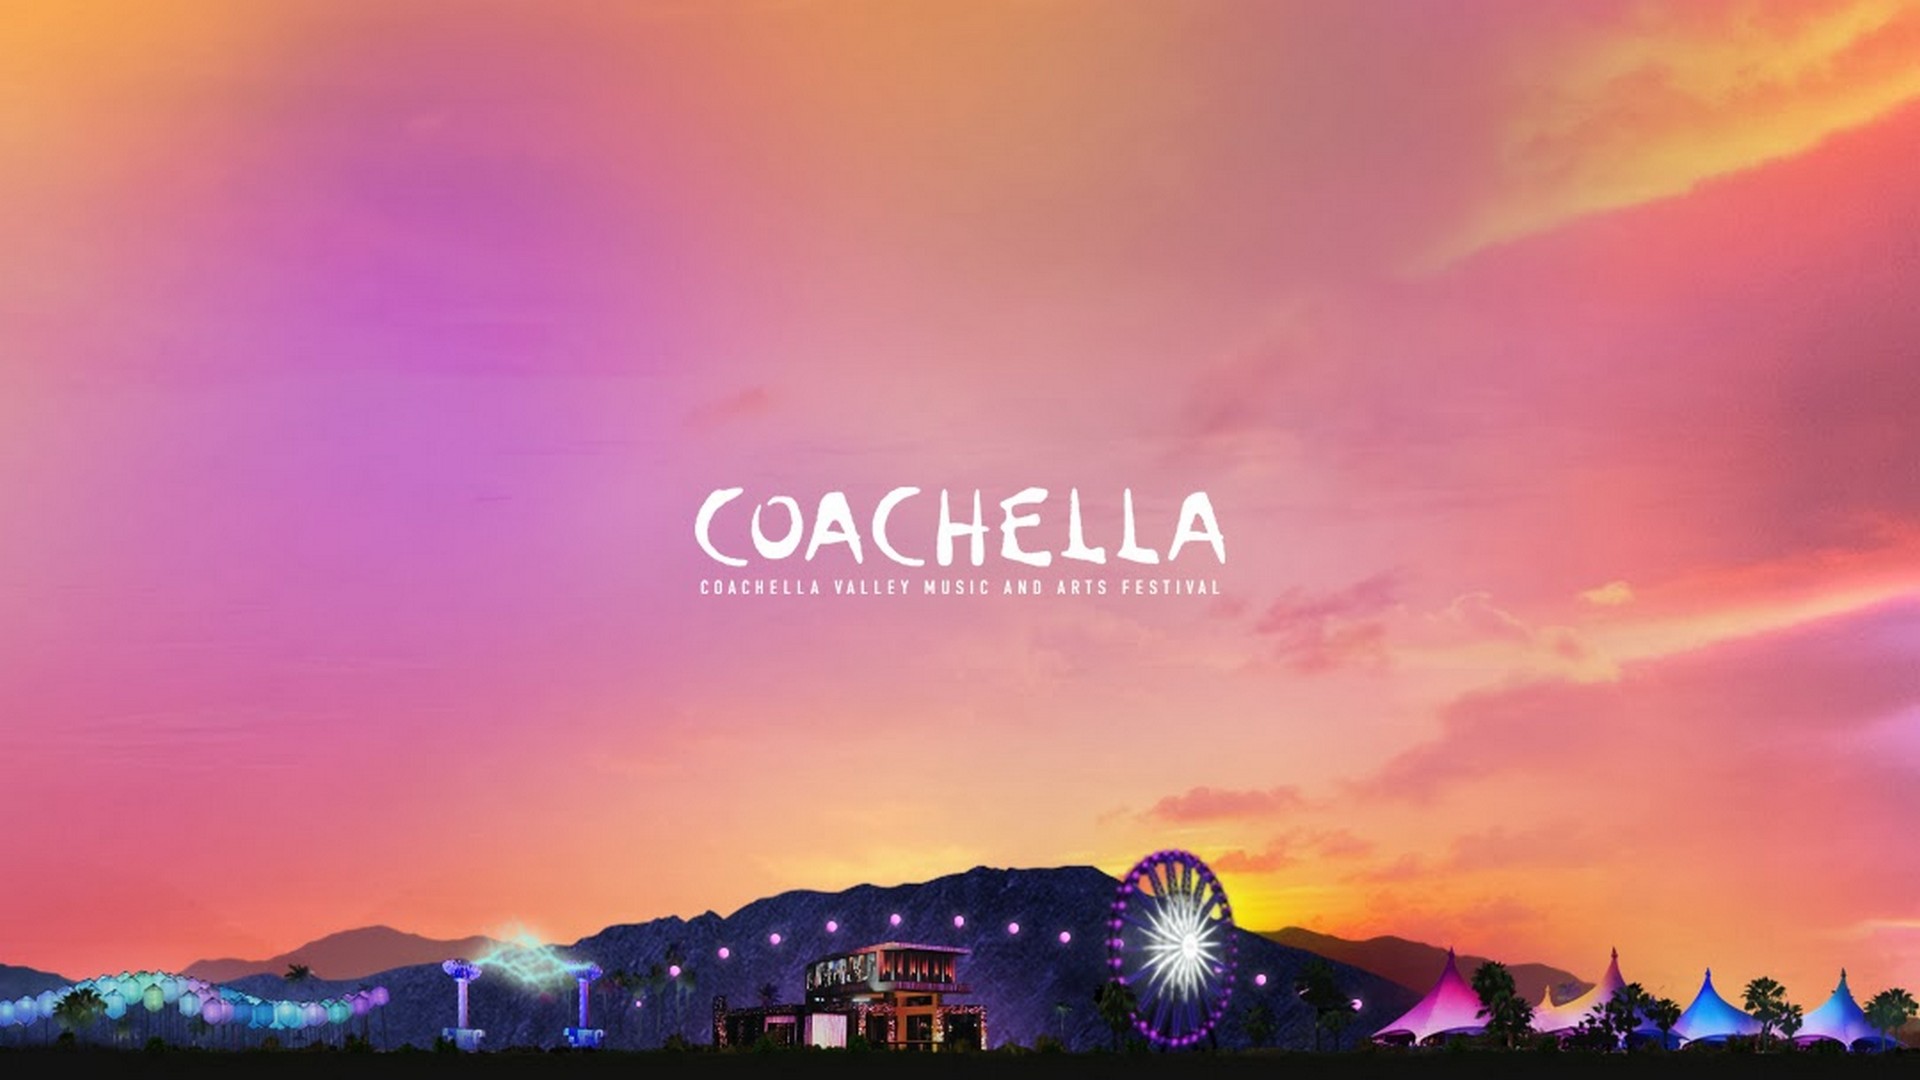 Best Coachella 2019 Wallpaper HD with high-resolution 1920x1080 pixel. You can use this wallpaper for your Desktop Computer Backgrounds, Mac Wallpapers, Android Lock screen or iPhone Screensavers and another smartphone device